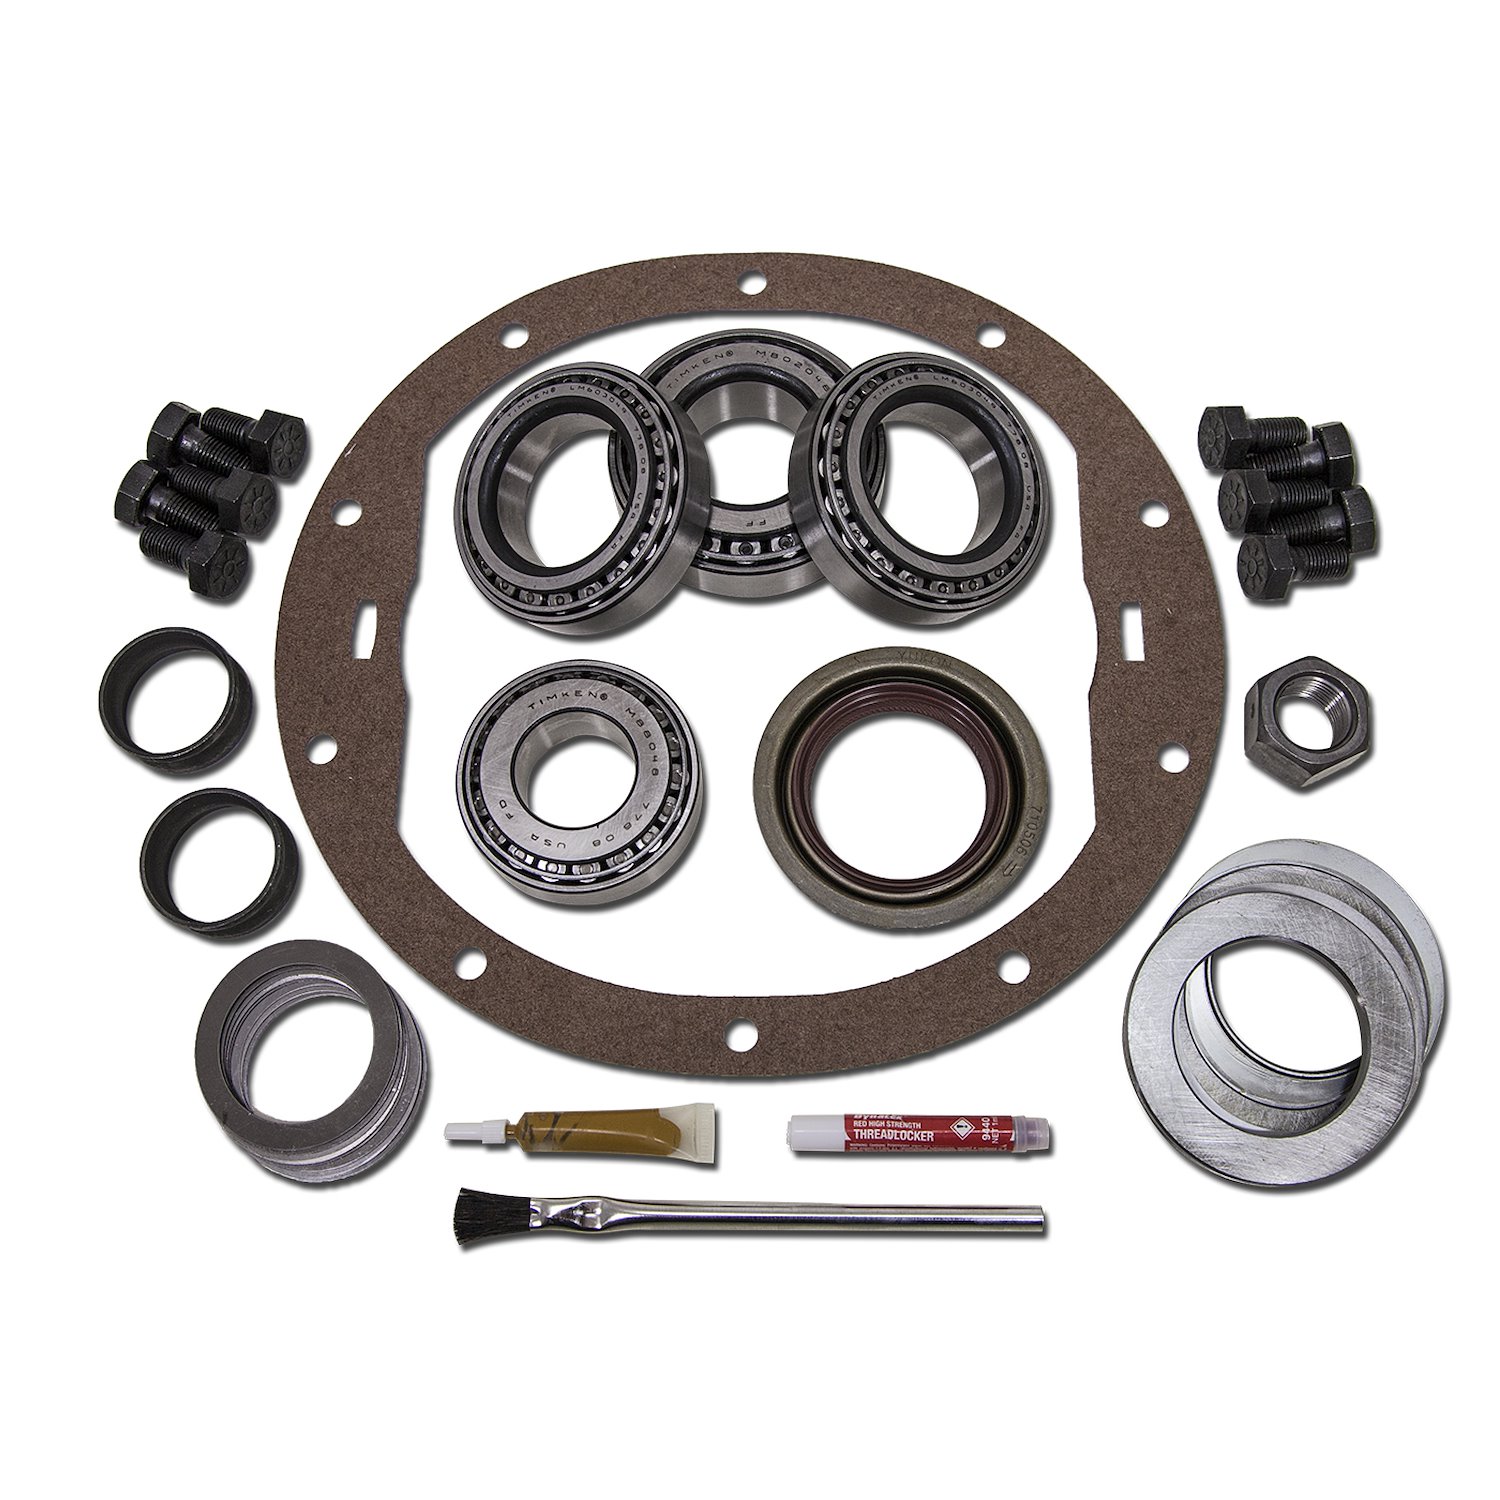 USA Standard ZK GM8.6IRS Master Overhaul Kit, For '10 & Up Camaro With V8